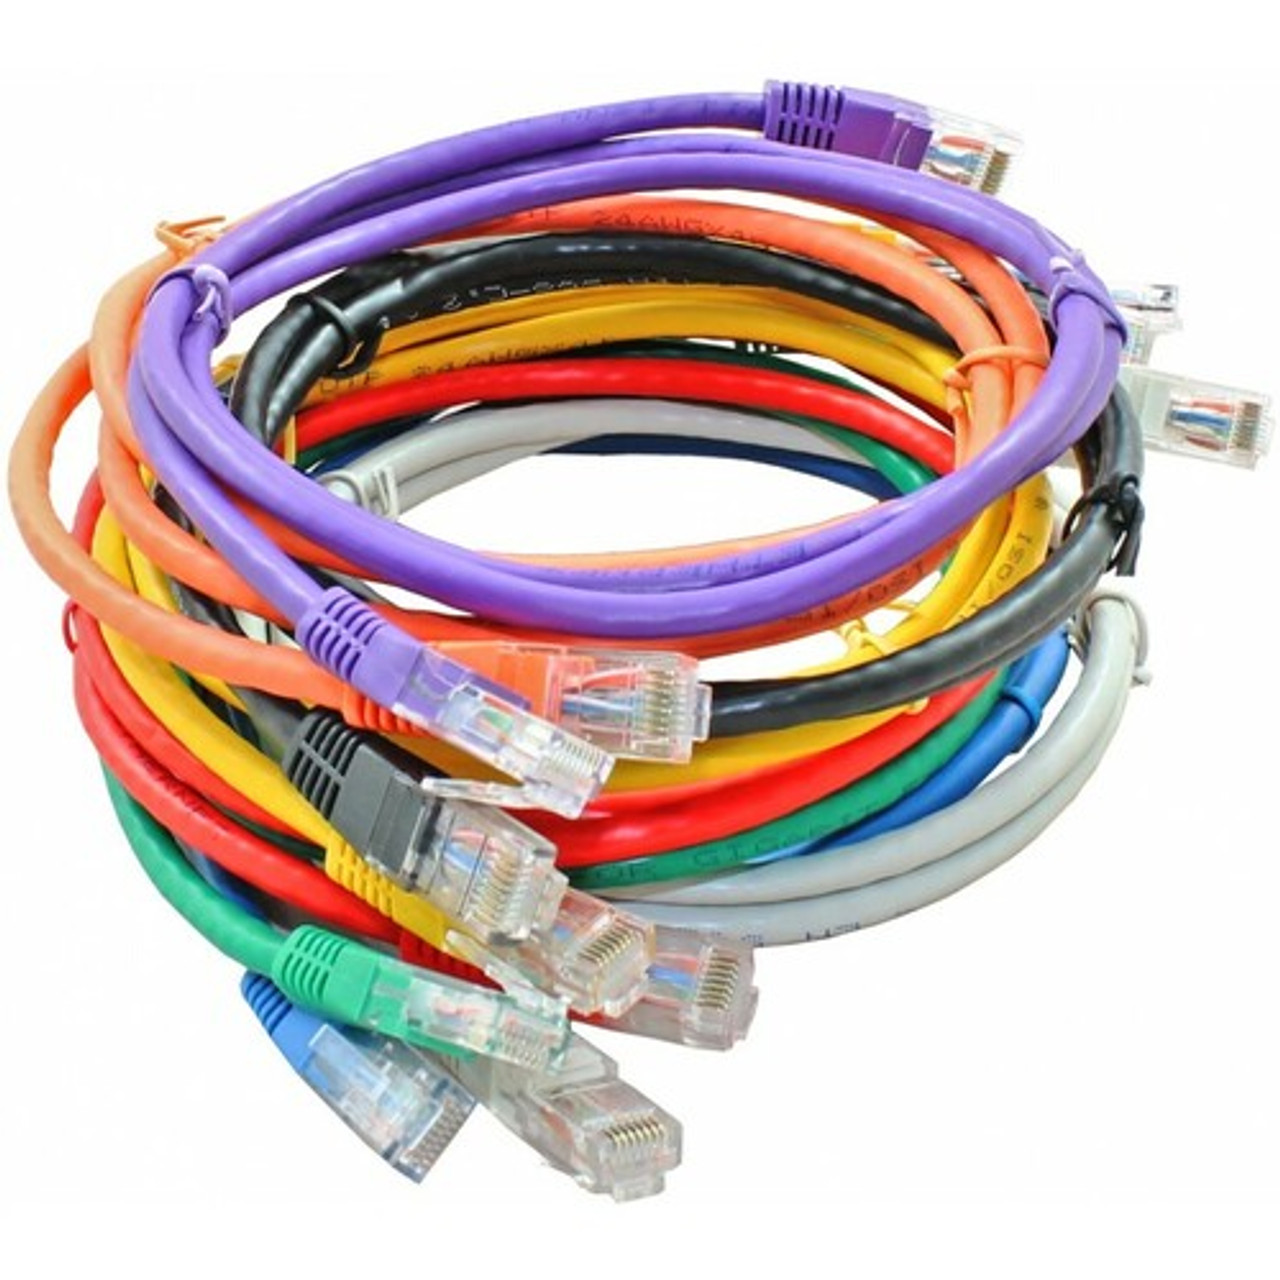 C6ASPAT6BL Blue Fluke Tested UL/TIA Certified 10GbE STP Category 6a Network Cable w/Strain Relief 10 Gigabit Shielded Snagless RJ45 100W PoE Patch Cord StarTech.com 6 ft CAT6a Ethernet Cable 